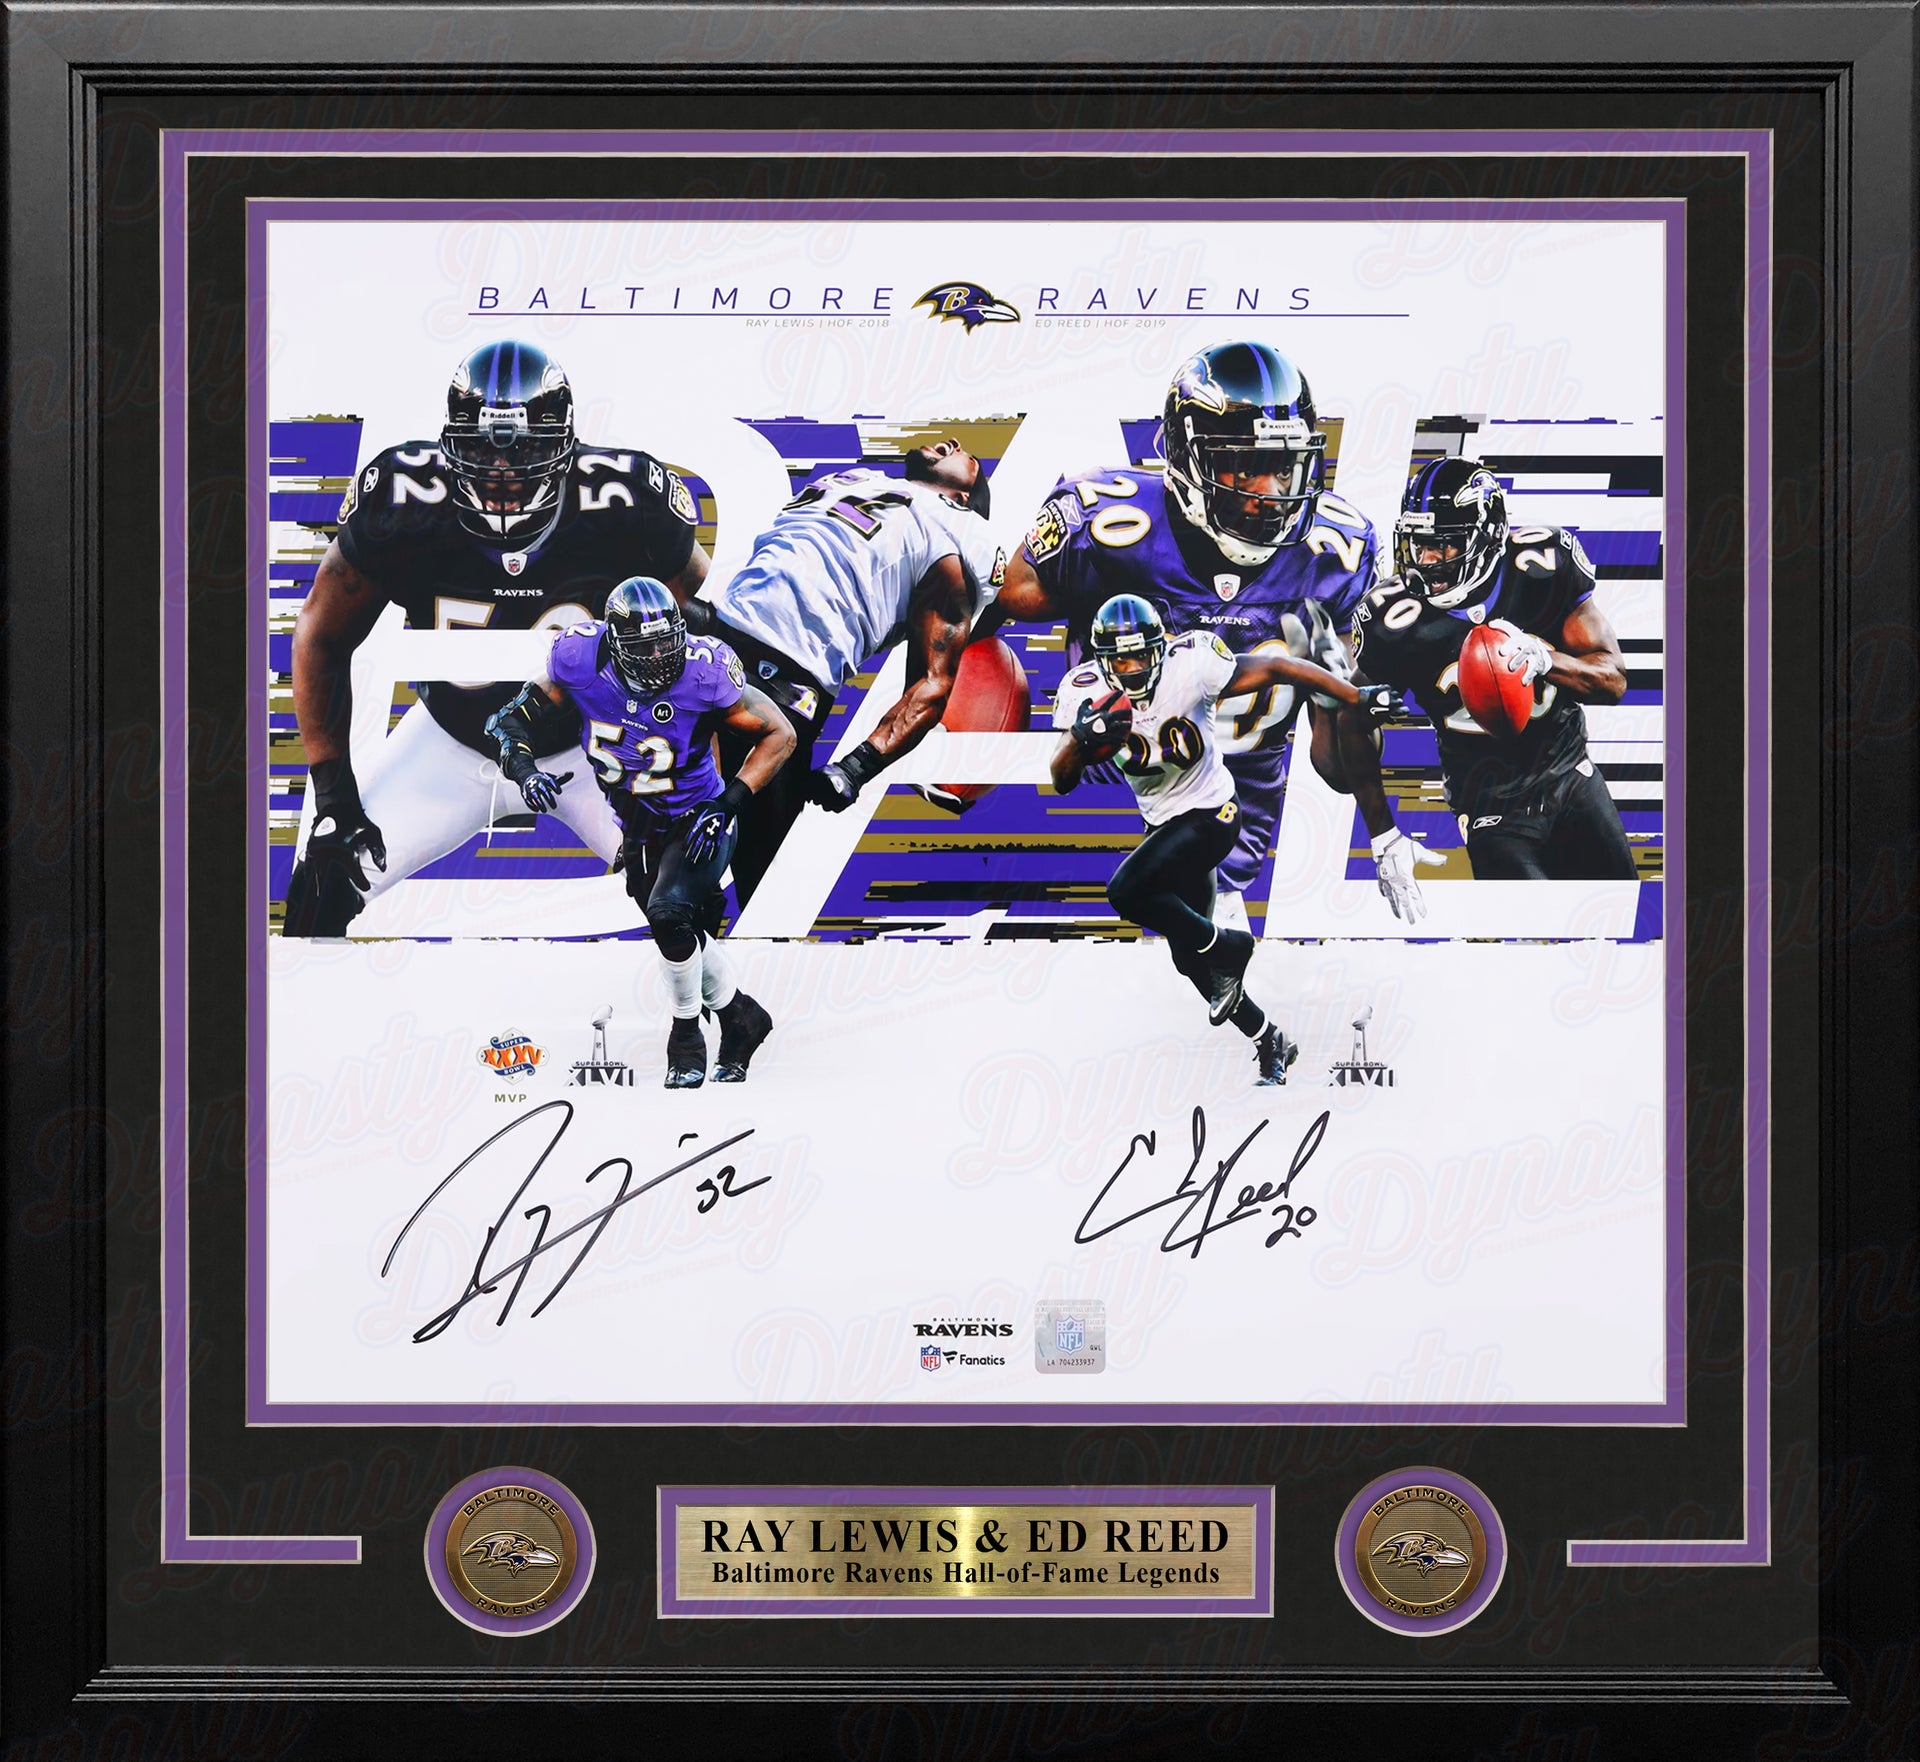 Ray Lewis & Ed Reed Baltimore Ravens Autographed 16" x 20" Framed Collage Photo - Dynasty Sports & Framing 